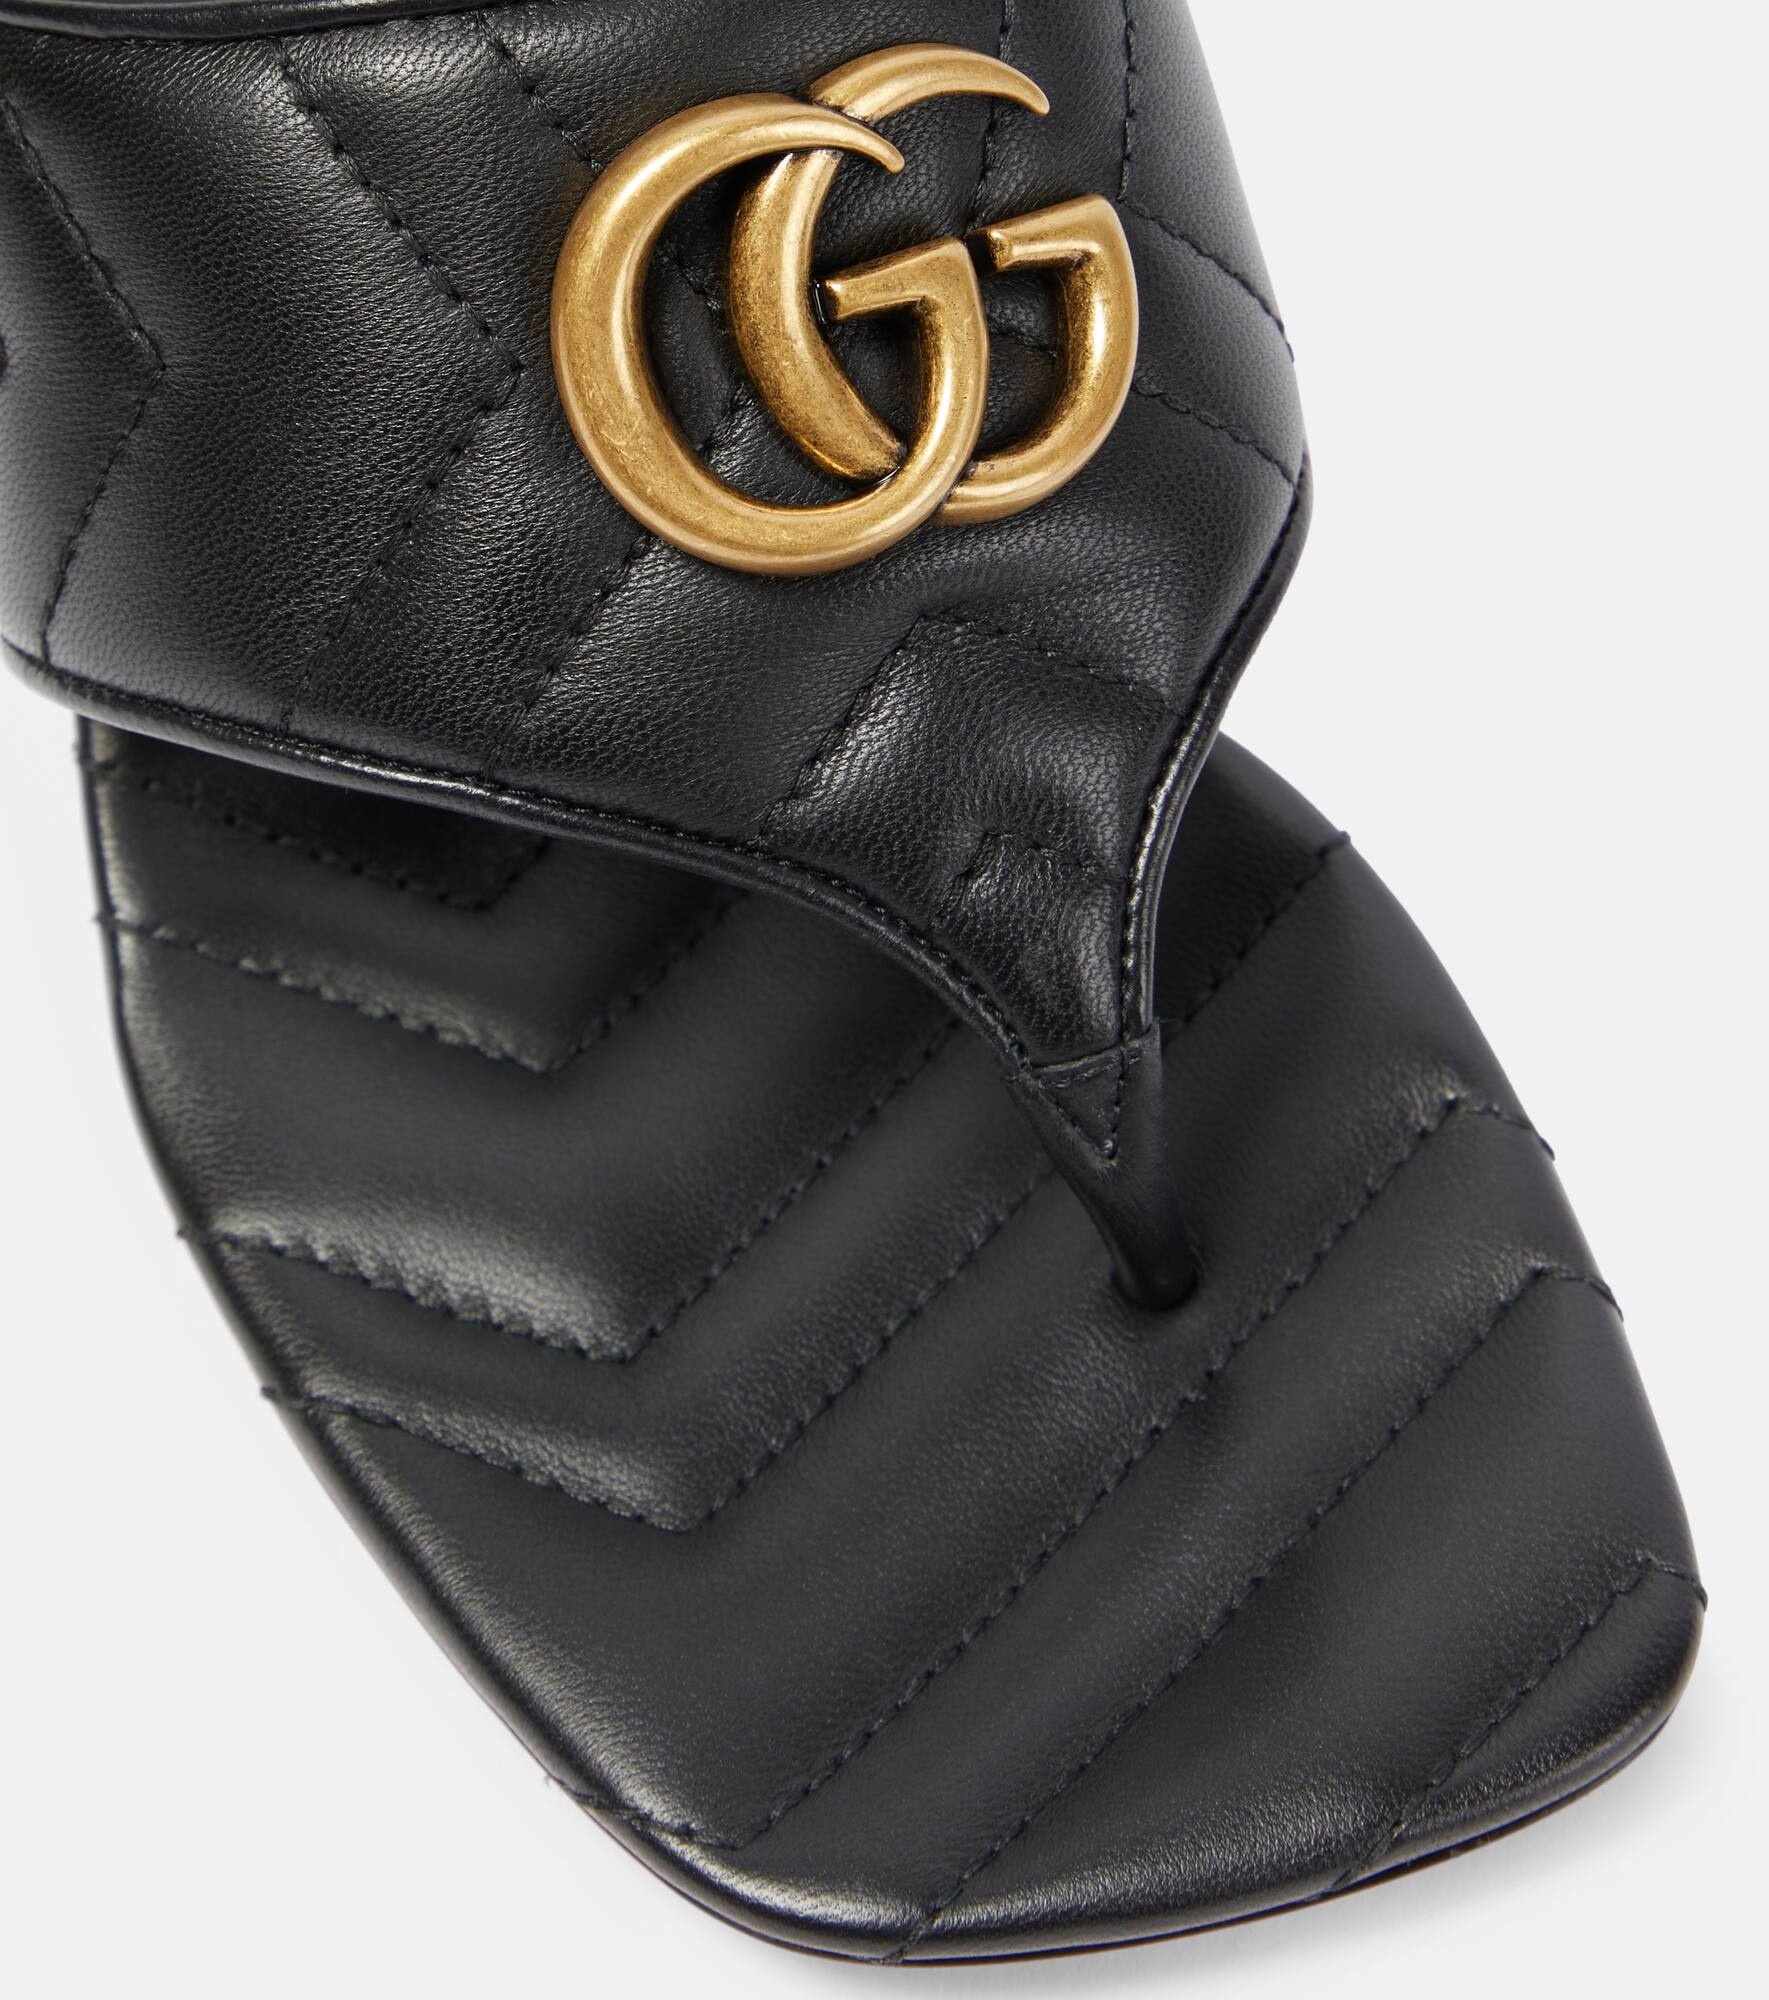 GG Marmont 55 leather thong sandals - 4